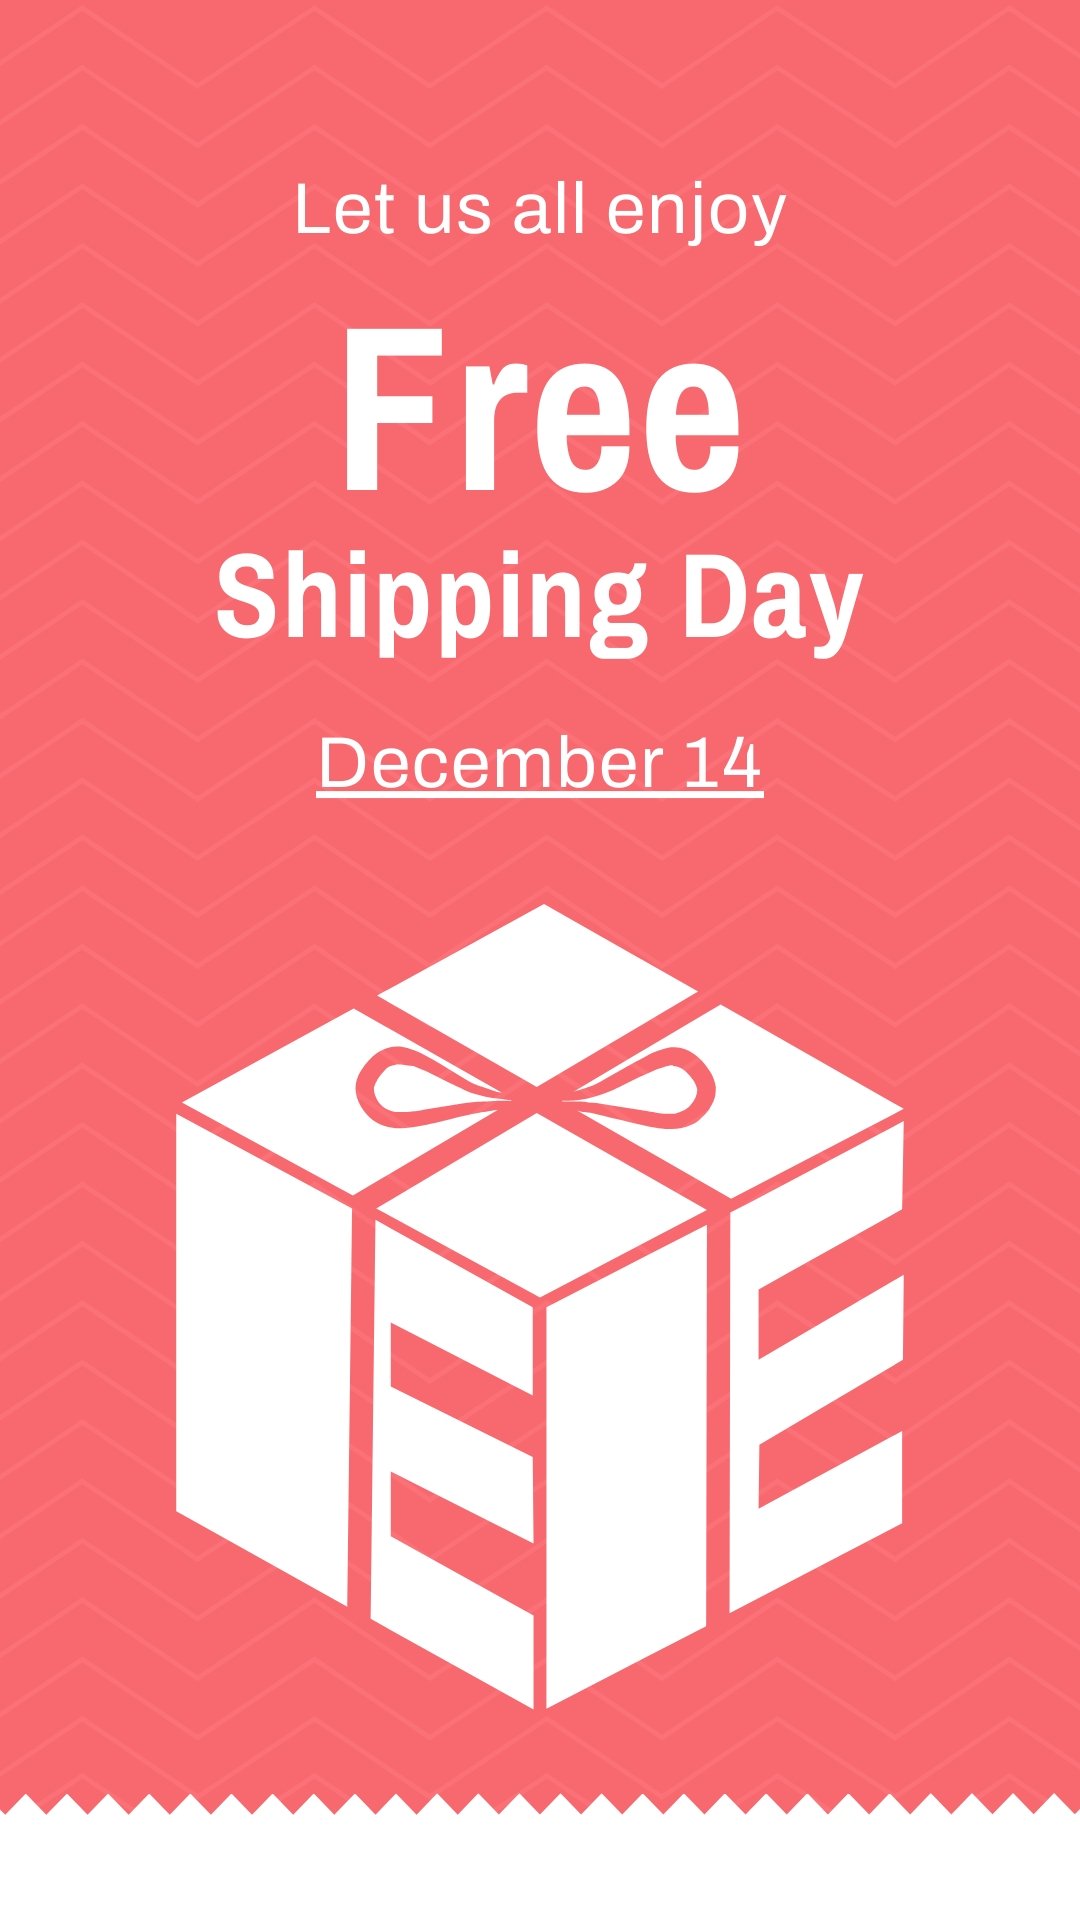 Free Shipping Day Instagram Story Template Download in PNG, JPG